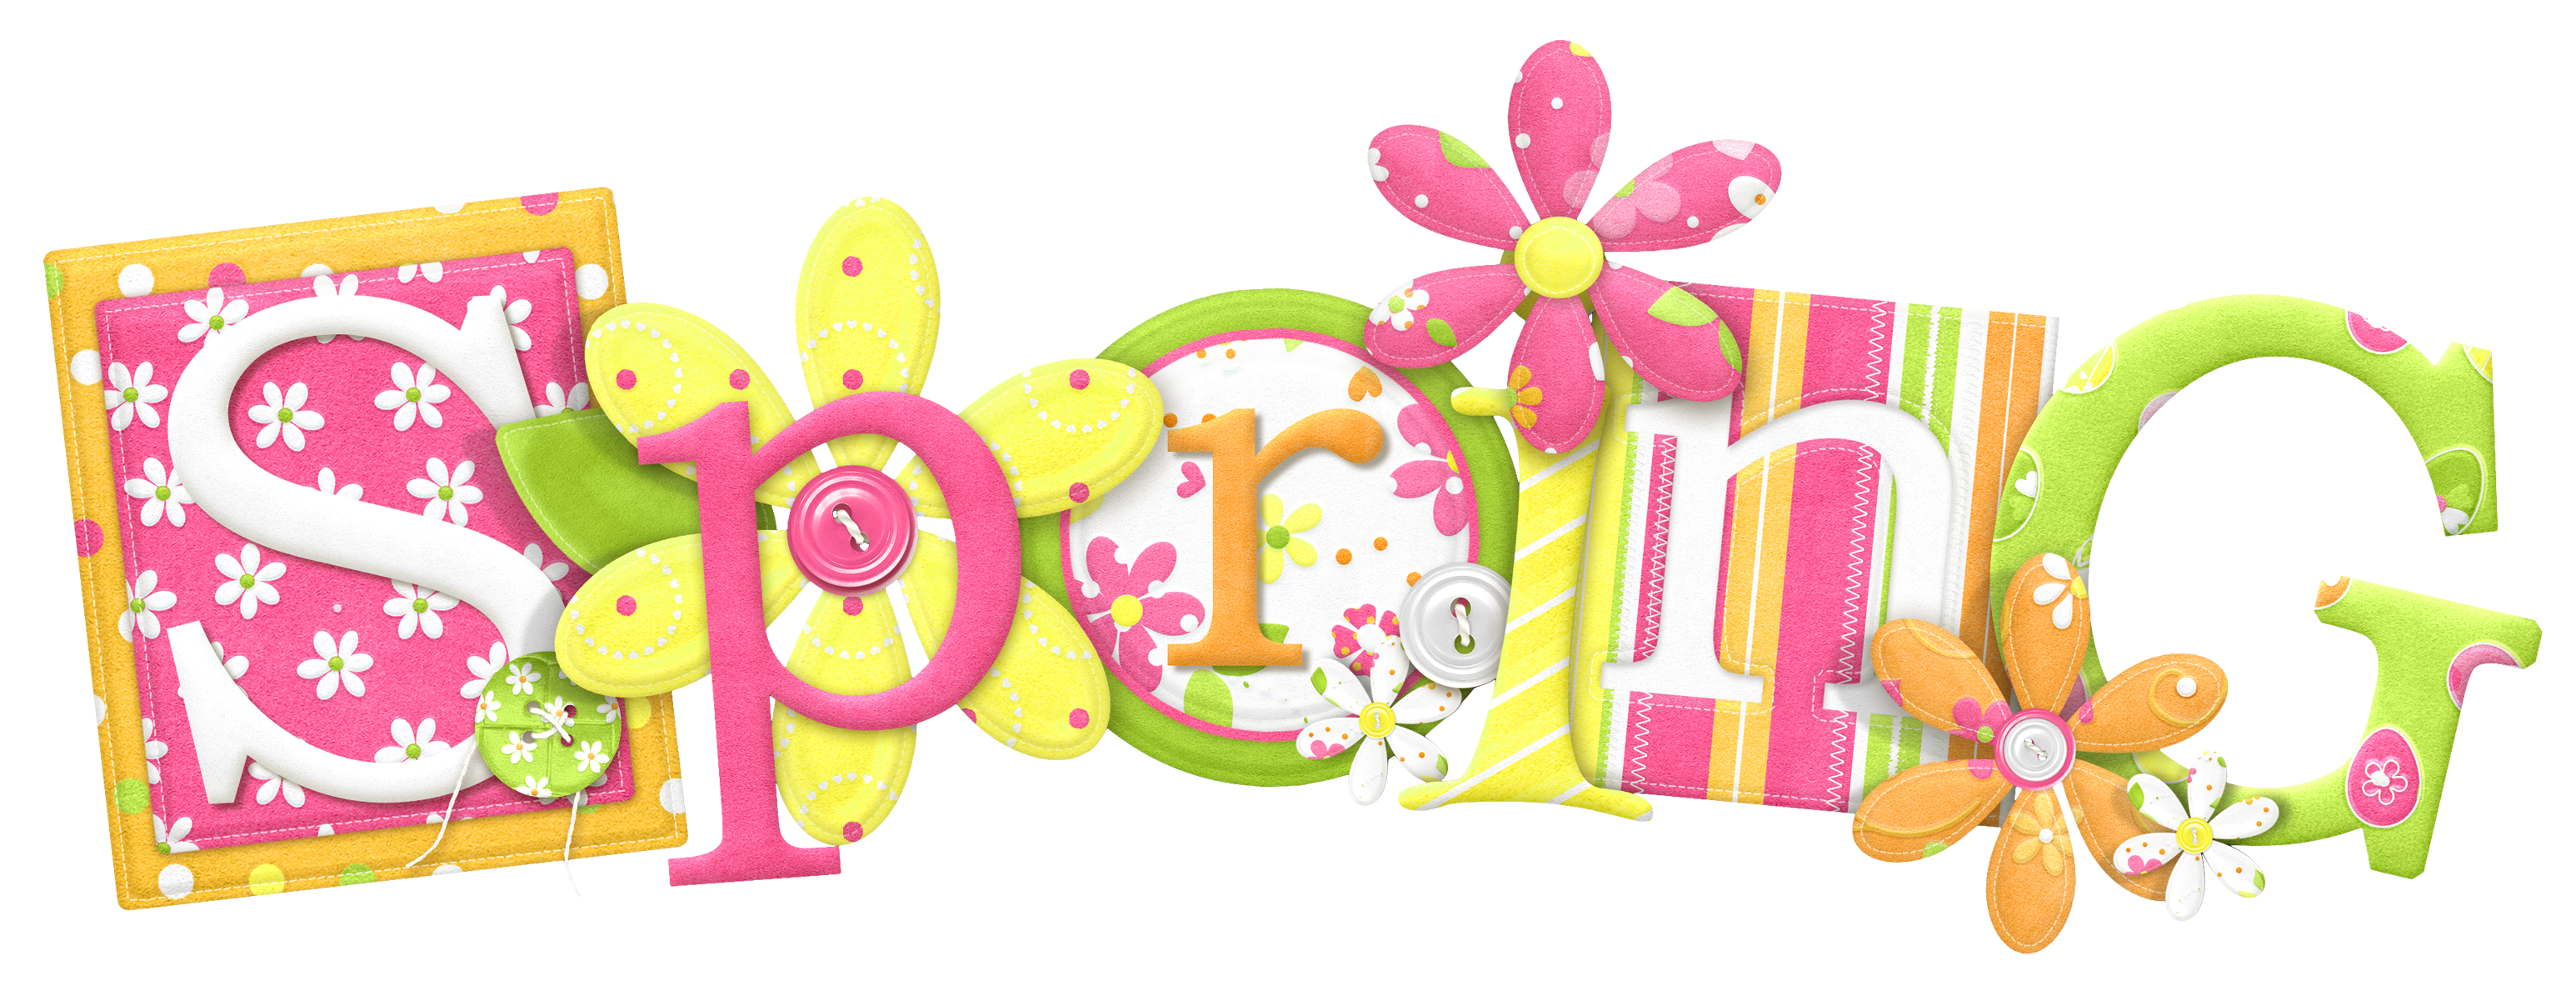 free clipart images of spring - photo #41